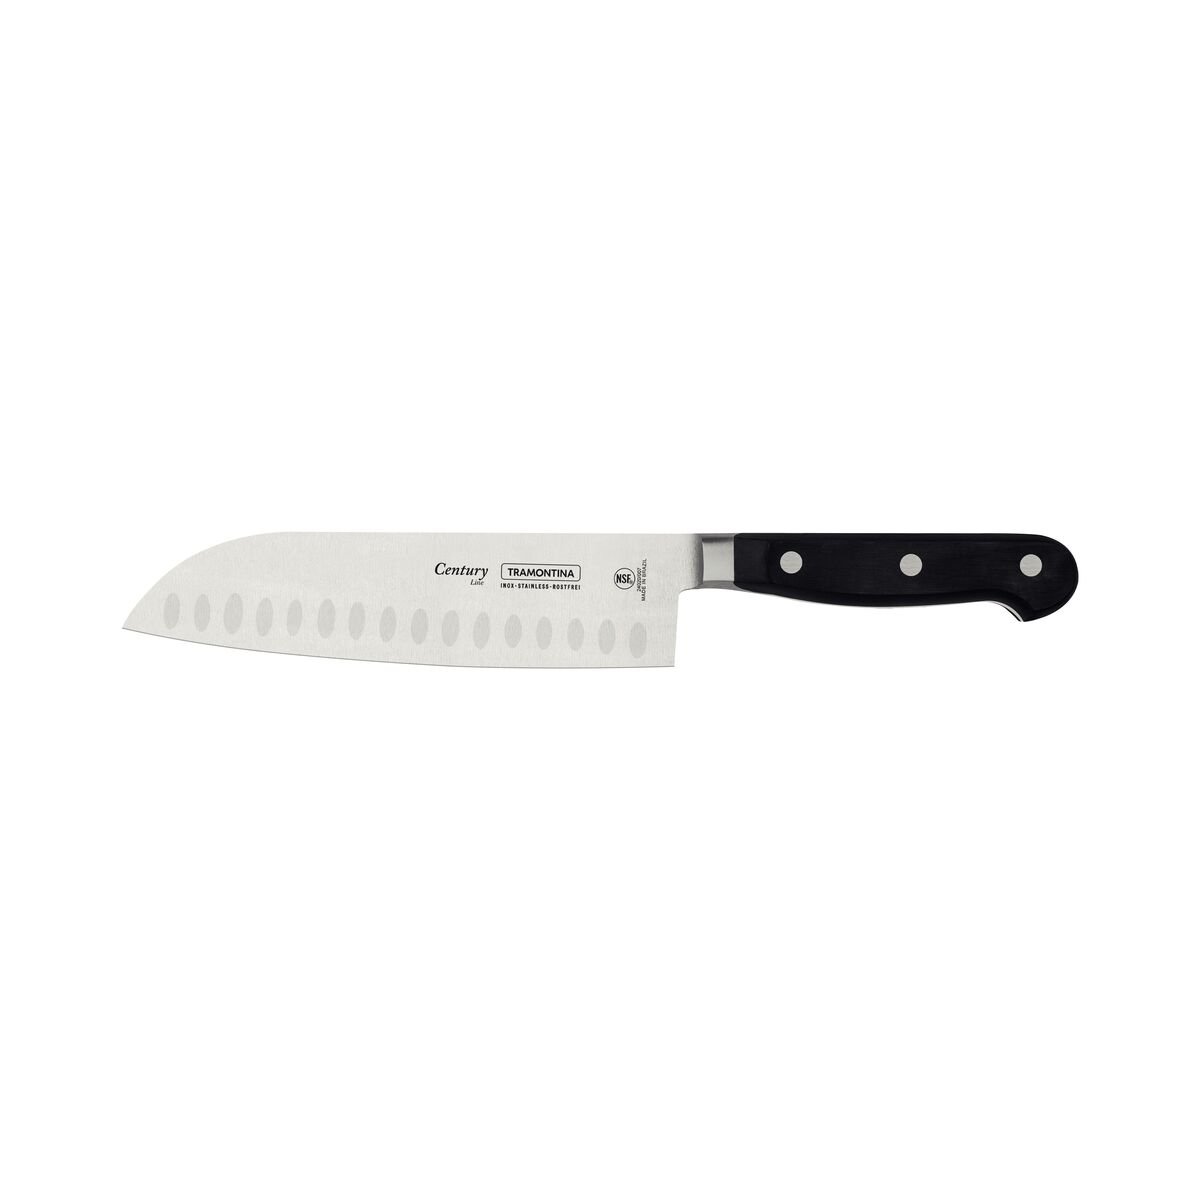 Tramontina Century 7" Santoku knife with Stainless-Steel Blade and Black Polycarbonate Handle